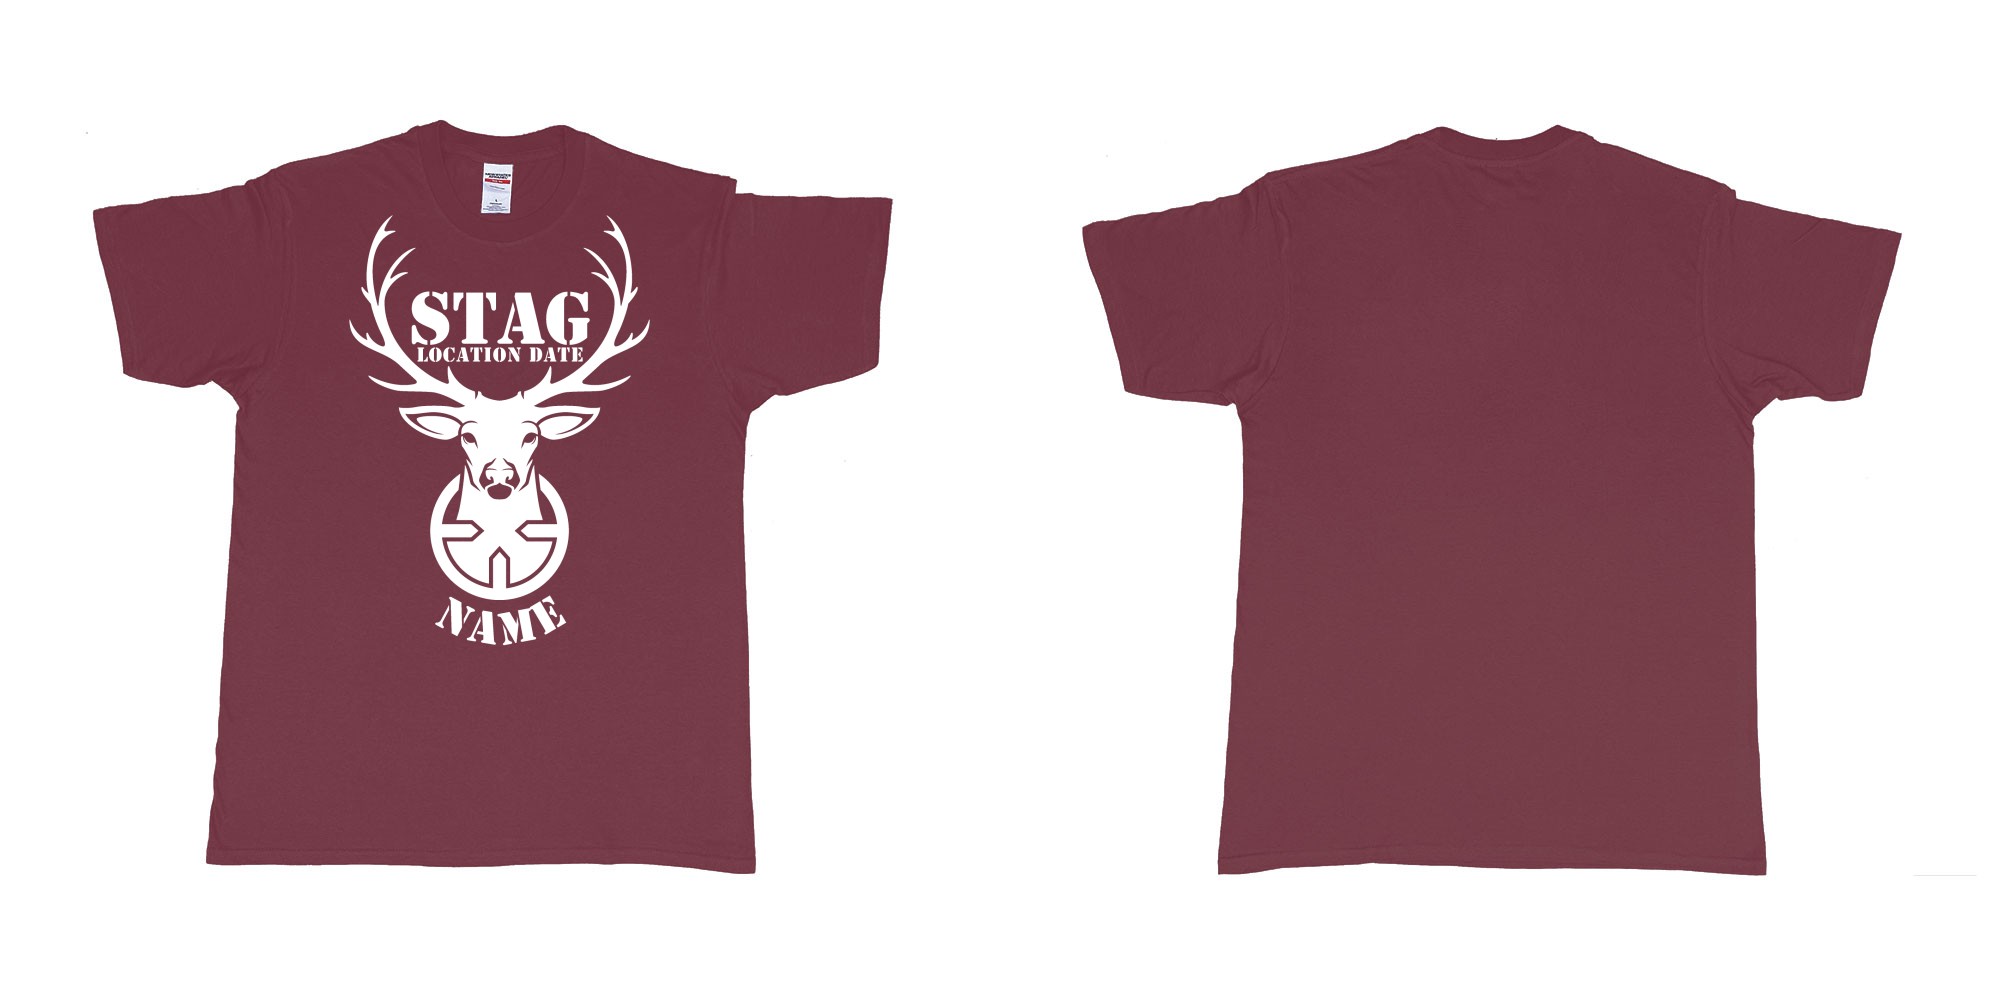 Custom tshirt design aiming for a stag custom tshirt print in fabric color marron choice your own text made in Bali by The Pirate Way